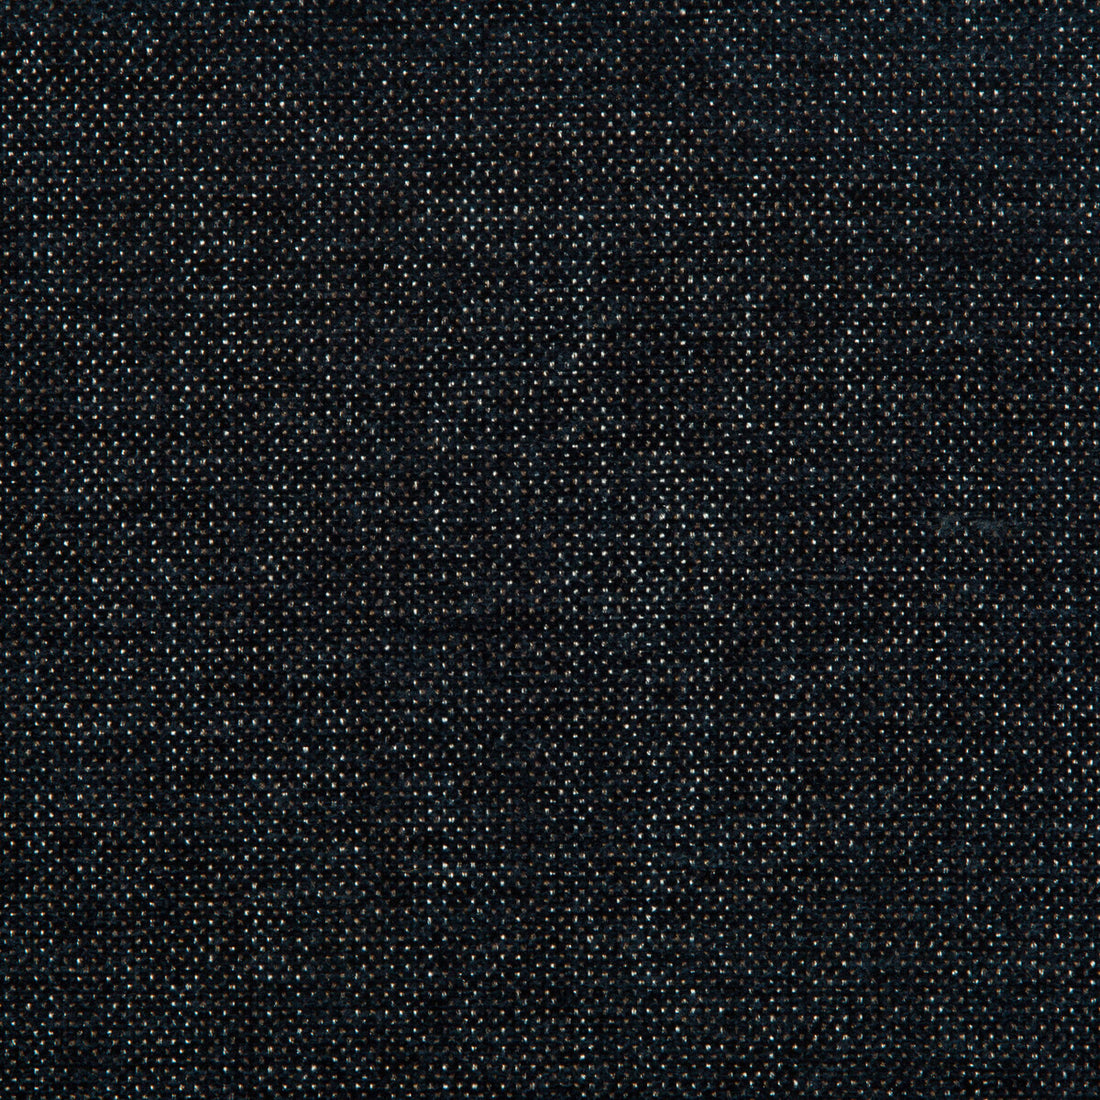 Kravet Smart fabric in 35393-50 color - pattern 35393.50.0 - by Kravet Smart in the Performance Crypton Home collection